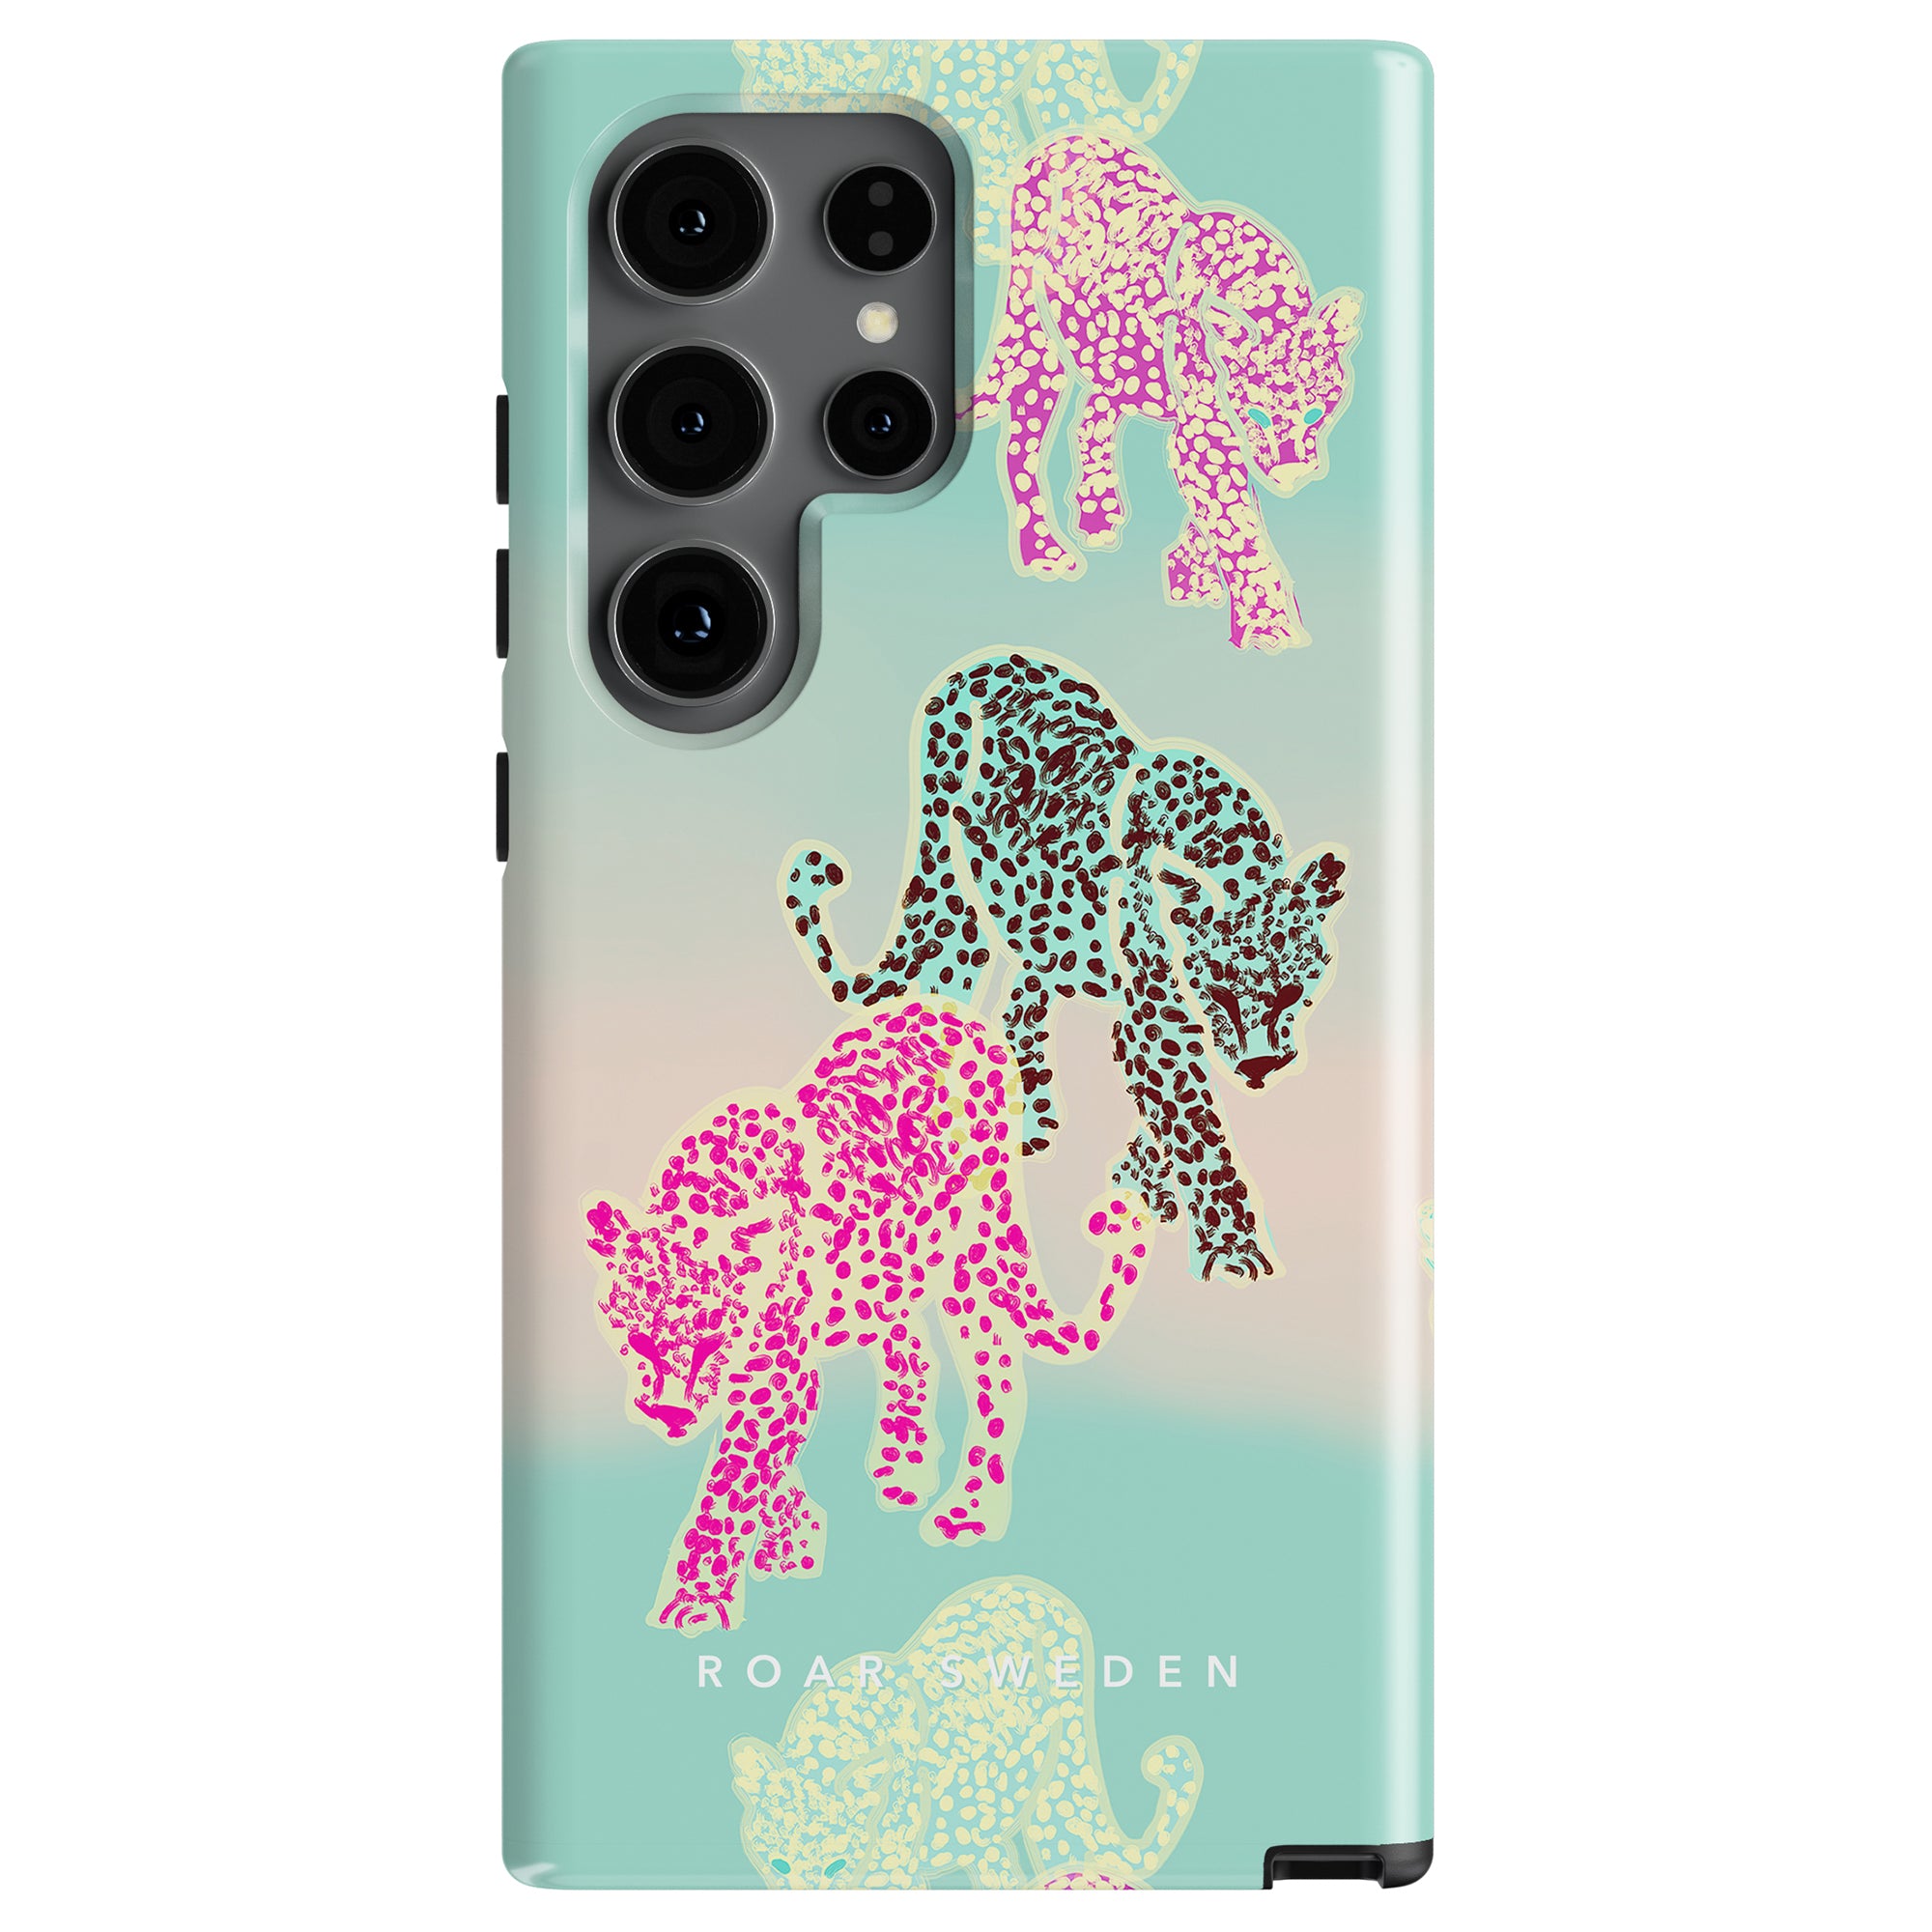 Phone case with a pastel background featuring a pattern of leopards in pink, black, and beige. Text at the bottom reads "ROAR SWEDEN." This Tame - Tough Case offers a modern design that combines style and durability.